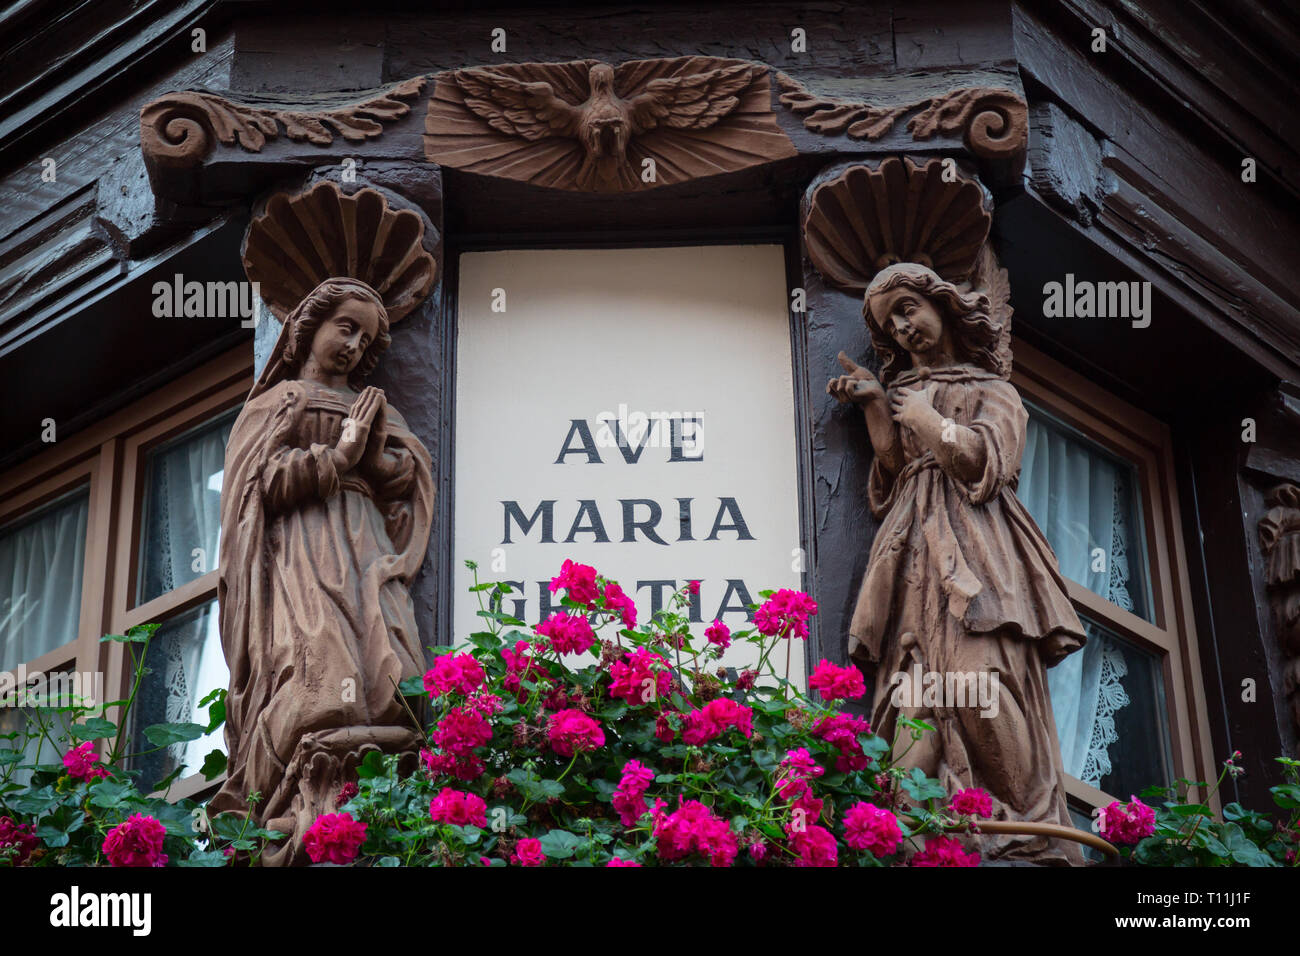 29.10.2014, Ribeauville, Grand Est, France - Angel sculptures on the facade of a half-timbered house in Alsace. Ribeauville is a charming place on the Stock Photo